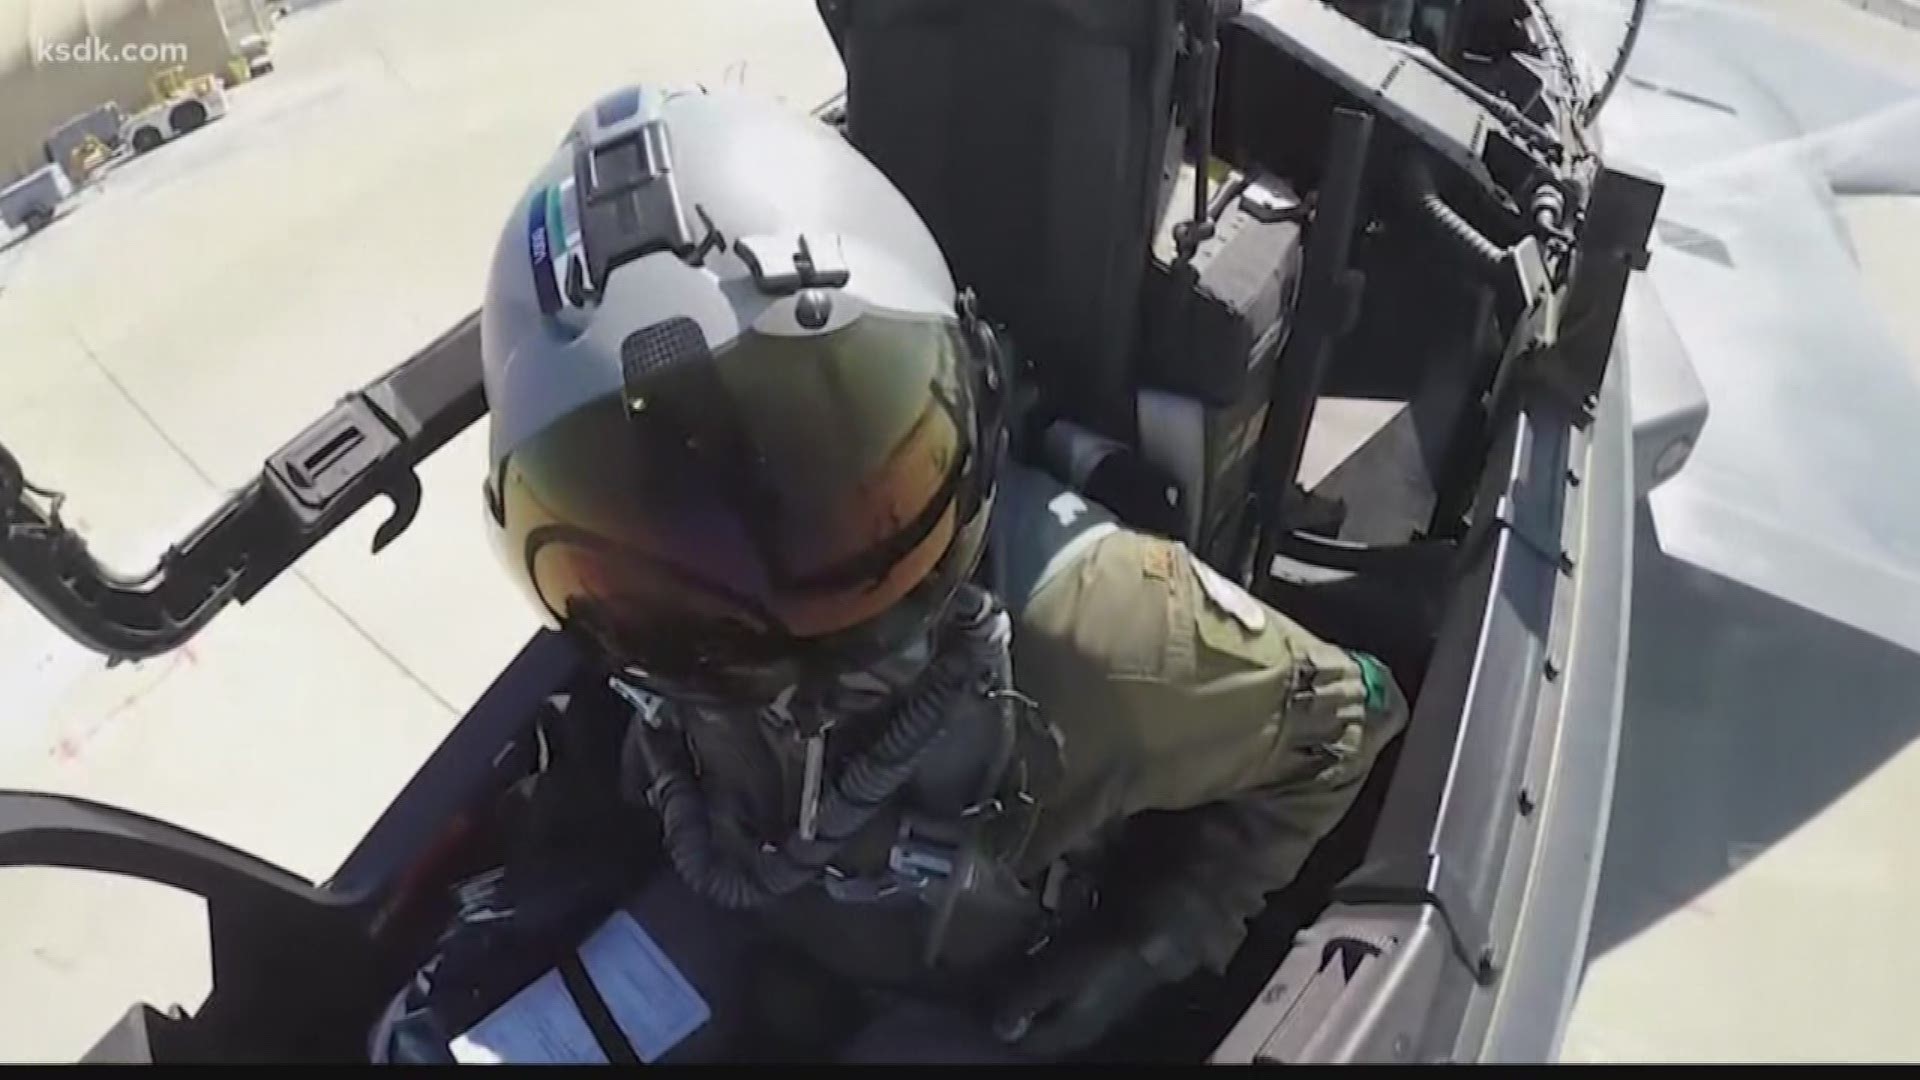 We got an exclusive chance today, to see Boeing's new advanced fighter jet. And who better to show us the F-15 E-X, than the jet's chief test pilot?